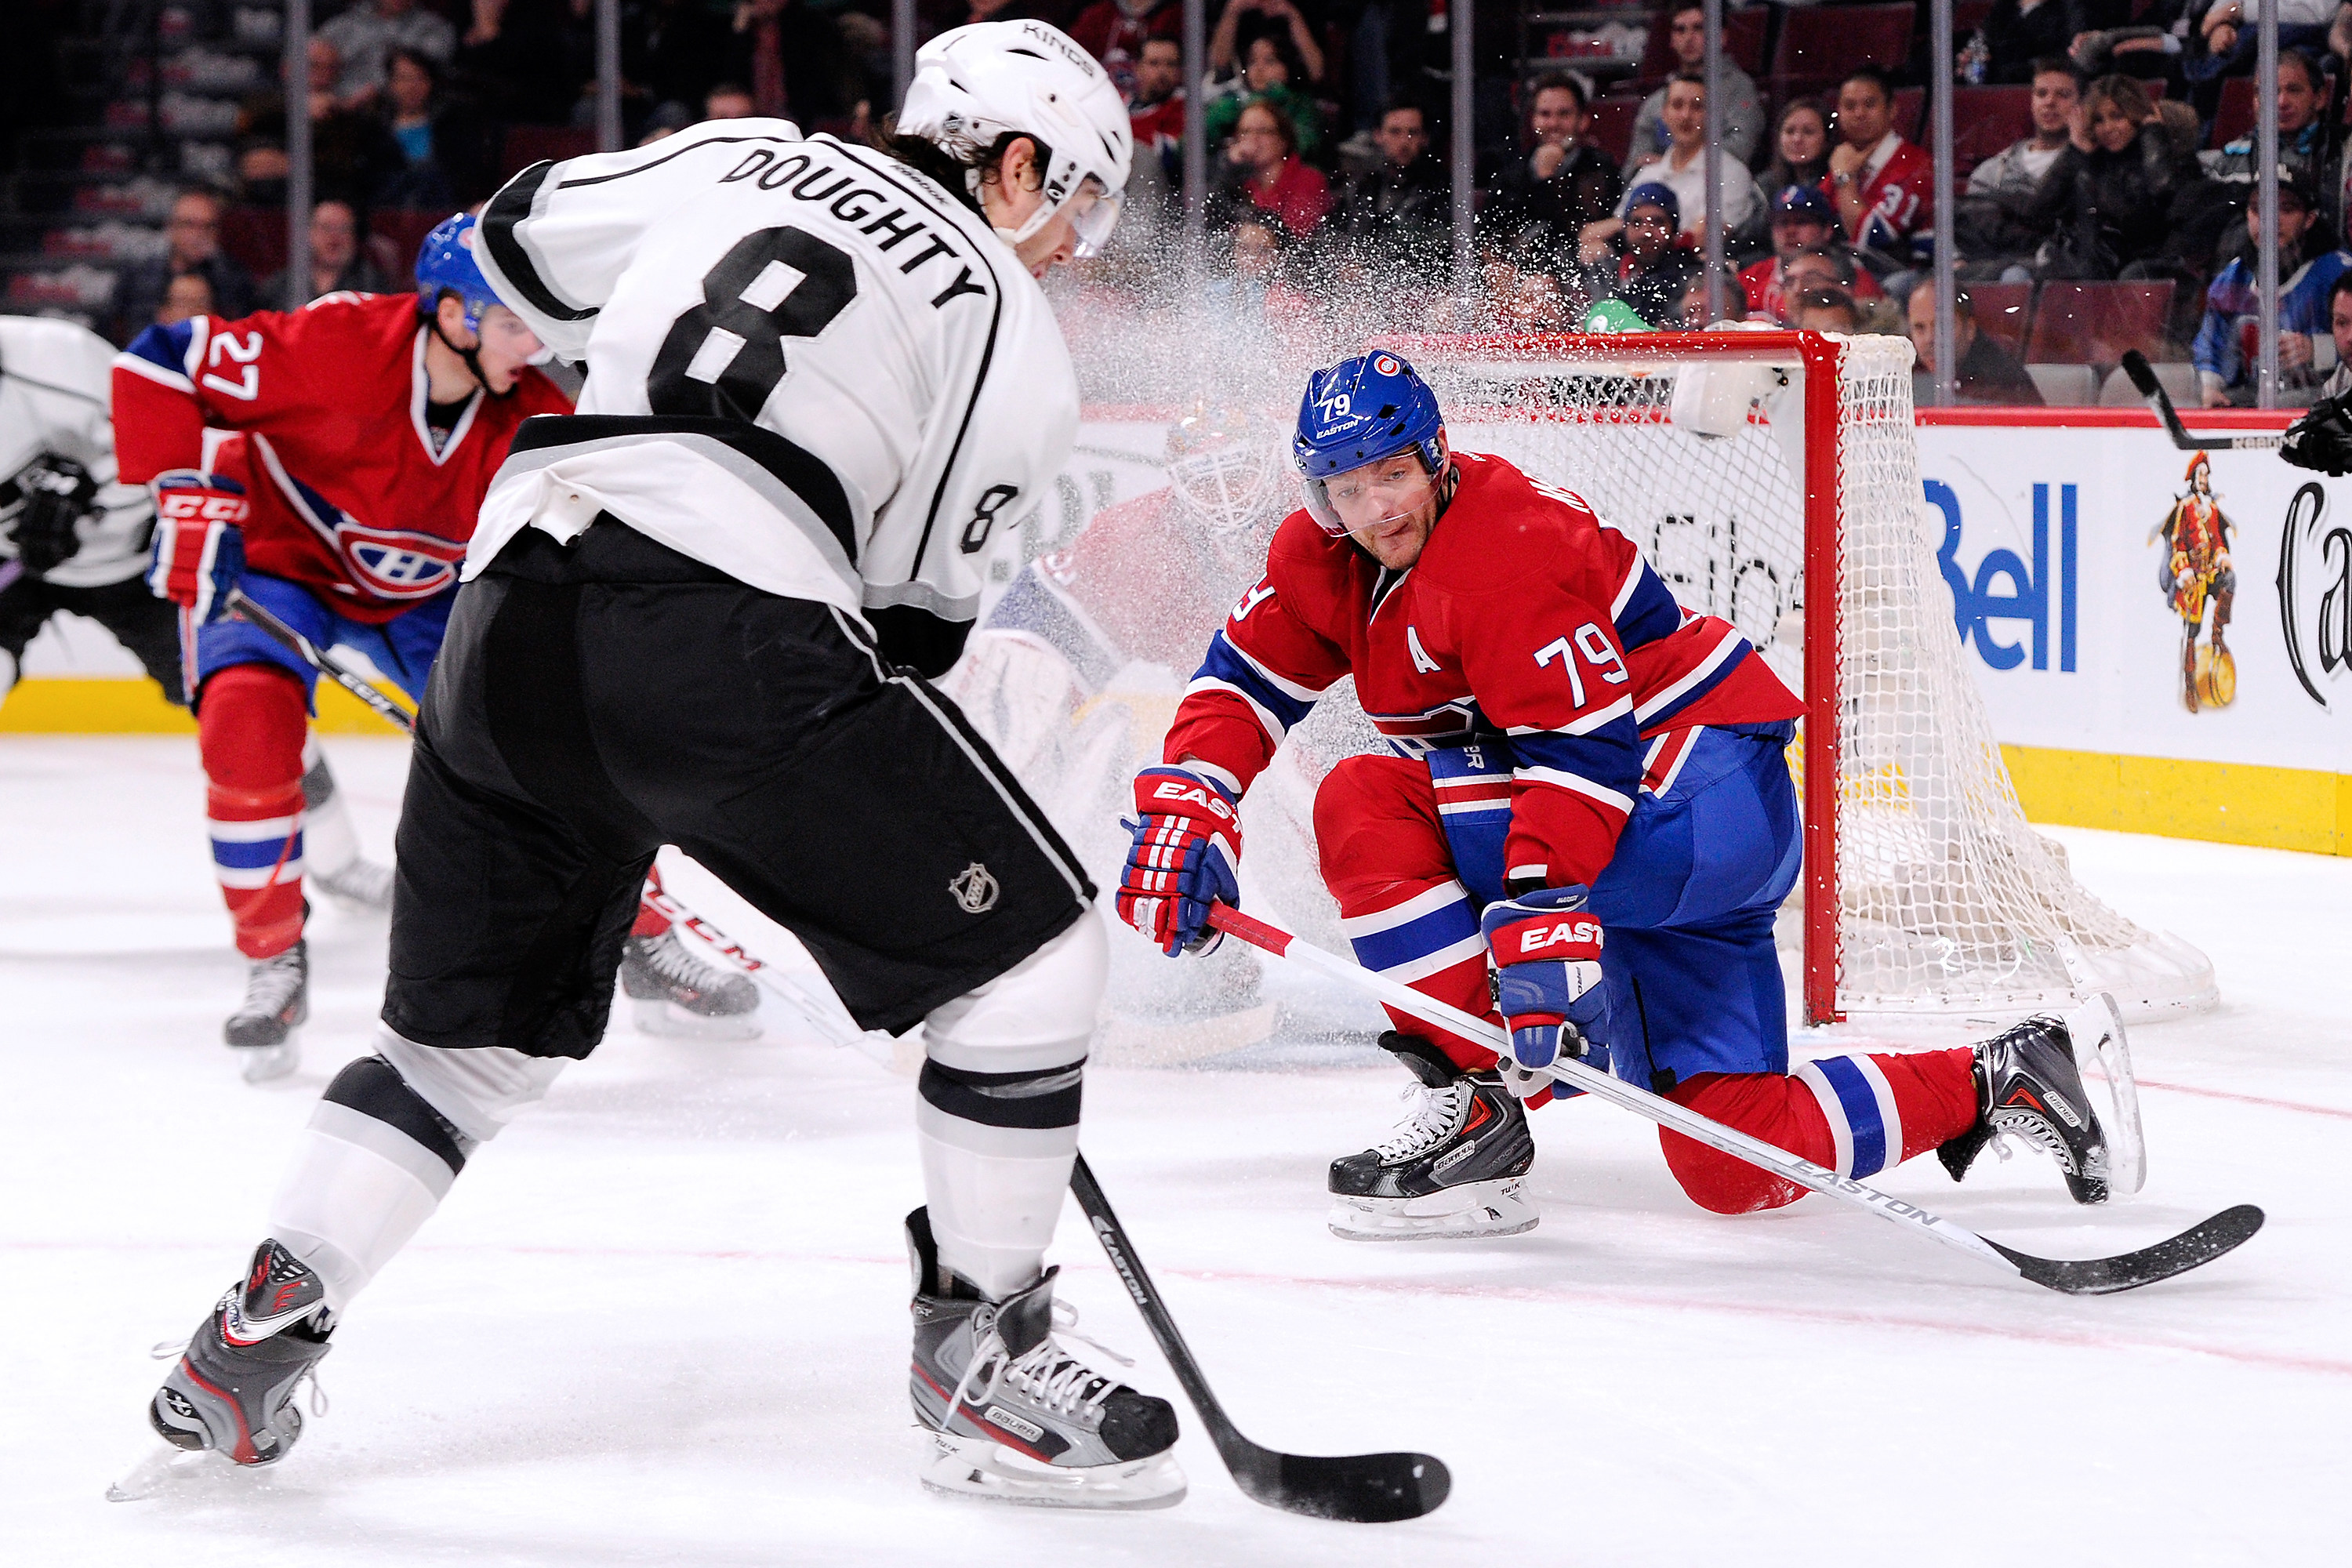 Andrei Markov #79 of the Montreal Canadiens gets down to block a shot by Drew Doughty #8 of the Los Angeles Kings during the NHL game at the Bell Centre on December 10, 2013 in Montreal, Quebec, Canada. The Kings defeated the Canadiens 6-0. (credit: Richard Wolowicz/Getty Images)